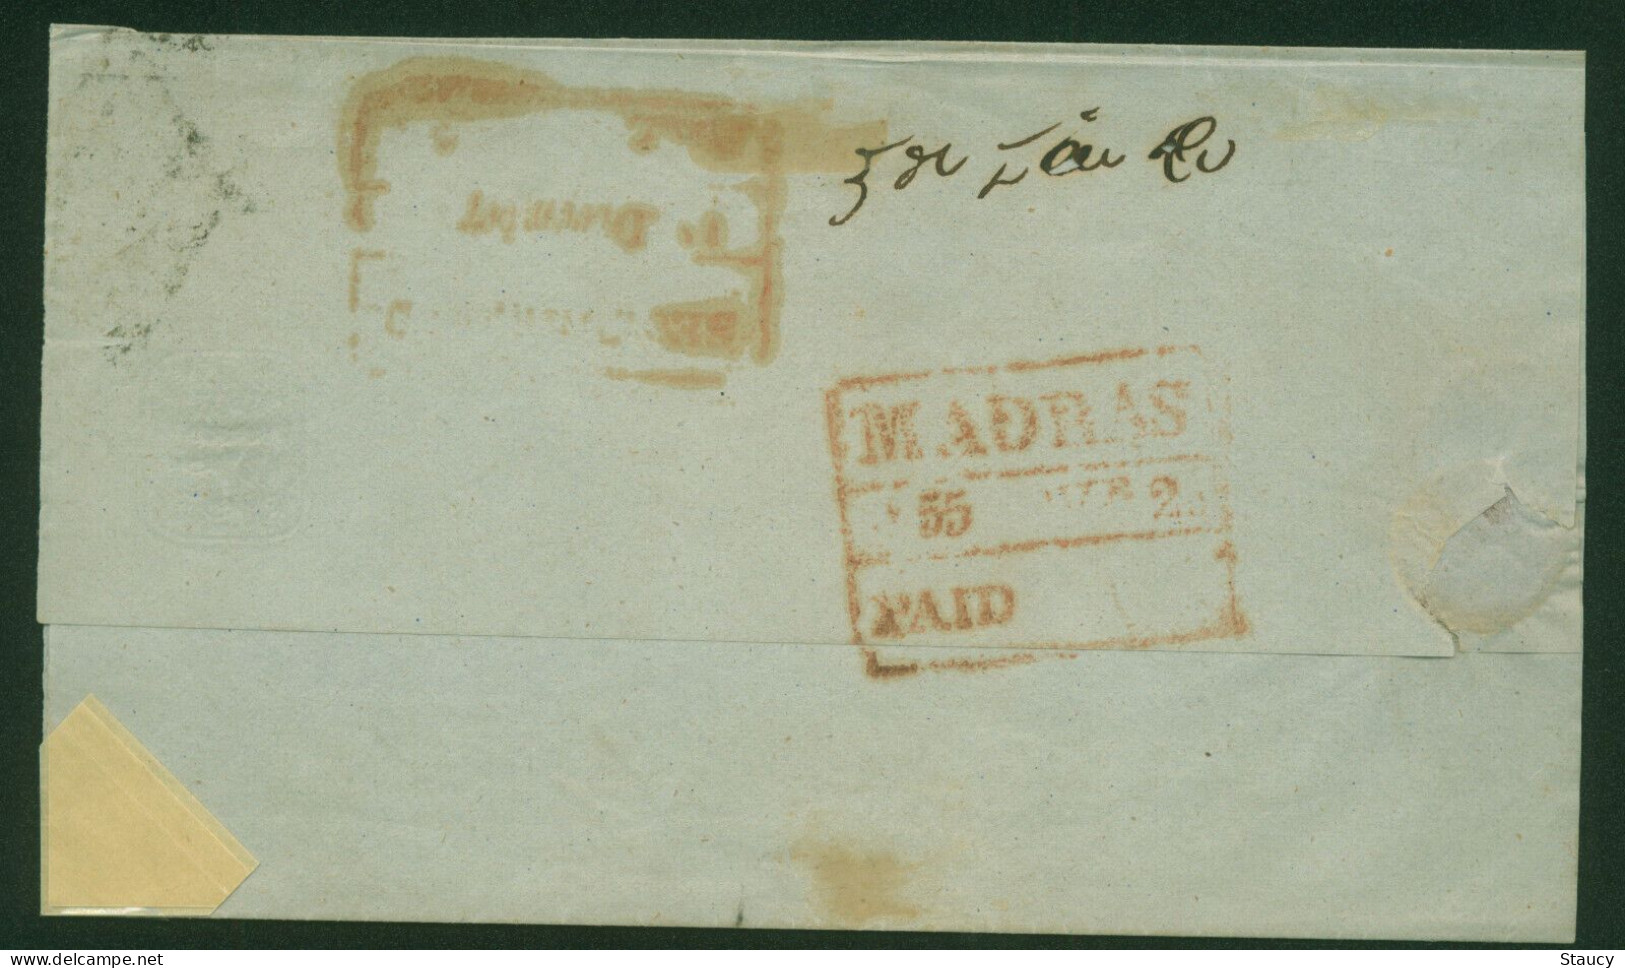 British India 1854 QV 1/2a Half Anna Litho / Lithograph Stamp Franking On Cover Madras To Secunderabad As Per Scan - 1854 Britische Indien-Kompanie